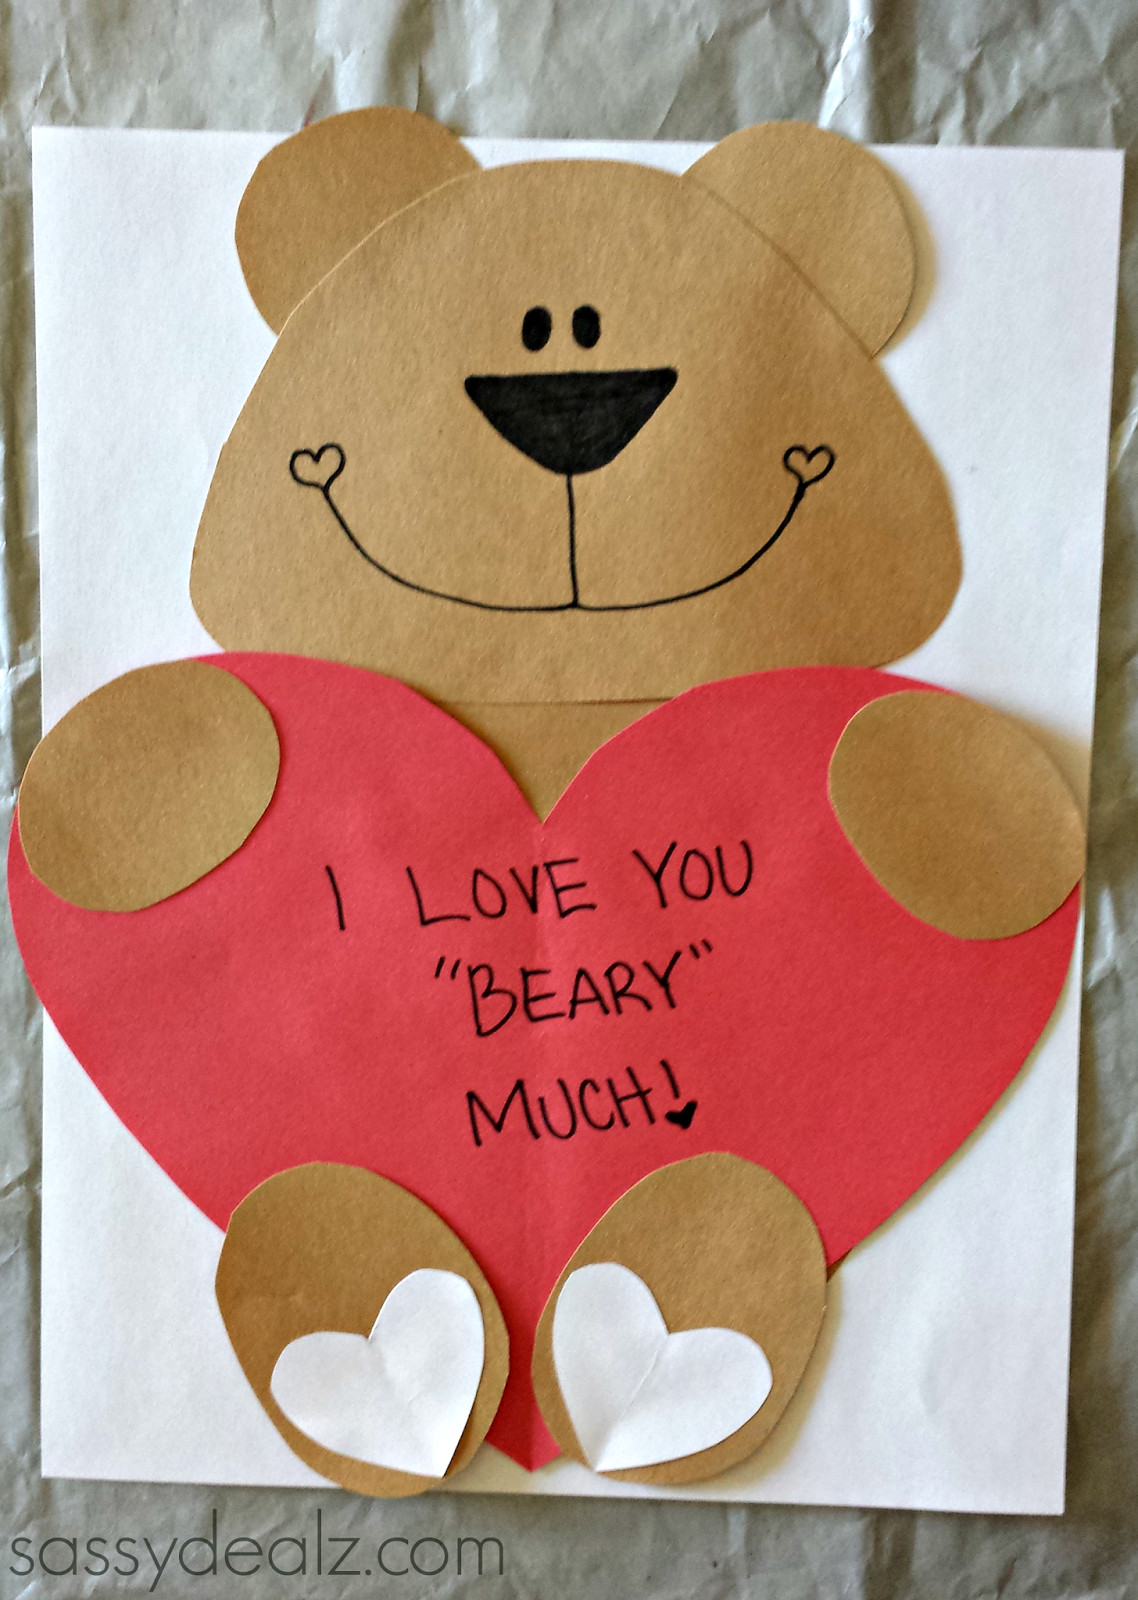 Cute Valentines Day Crafts
 "I Love You Beary Much" Valentine Bear Craft For Kids